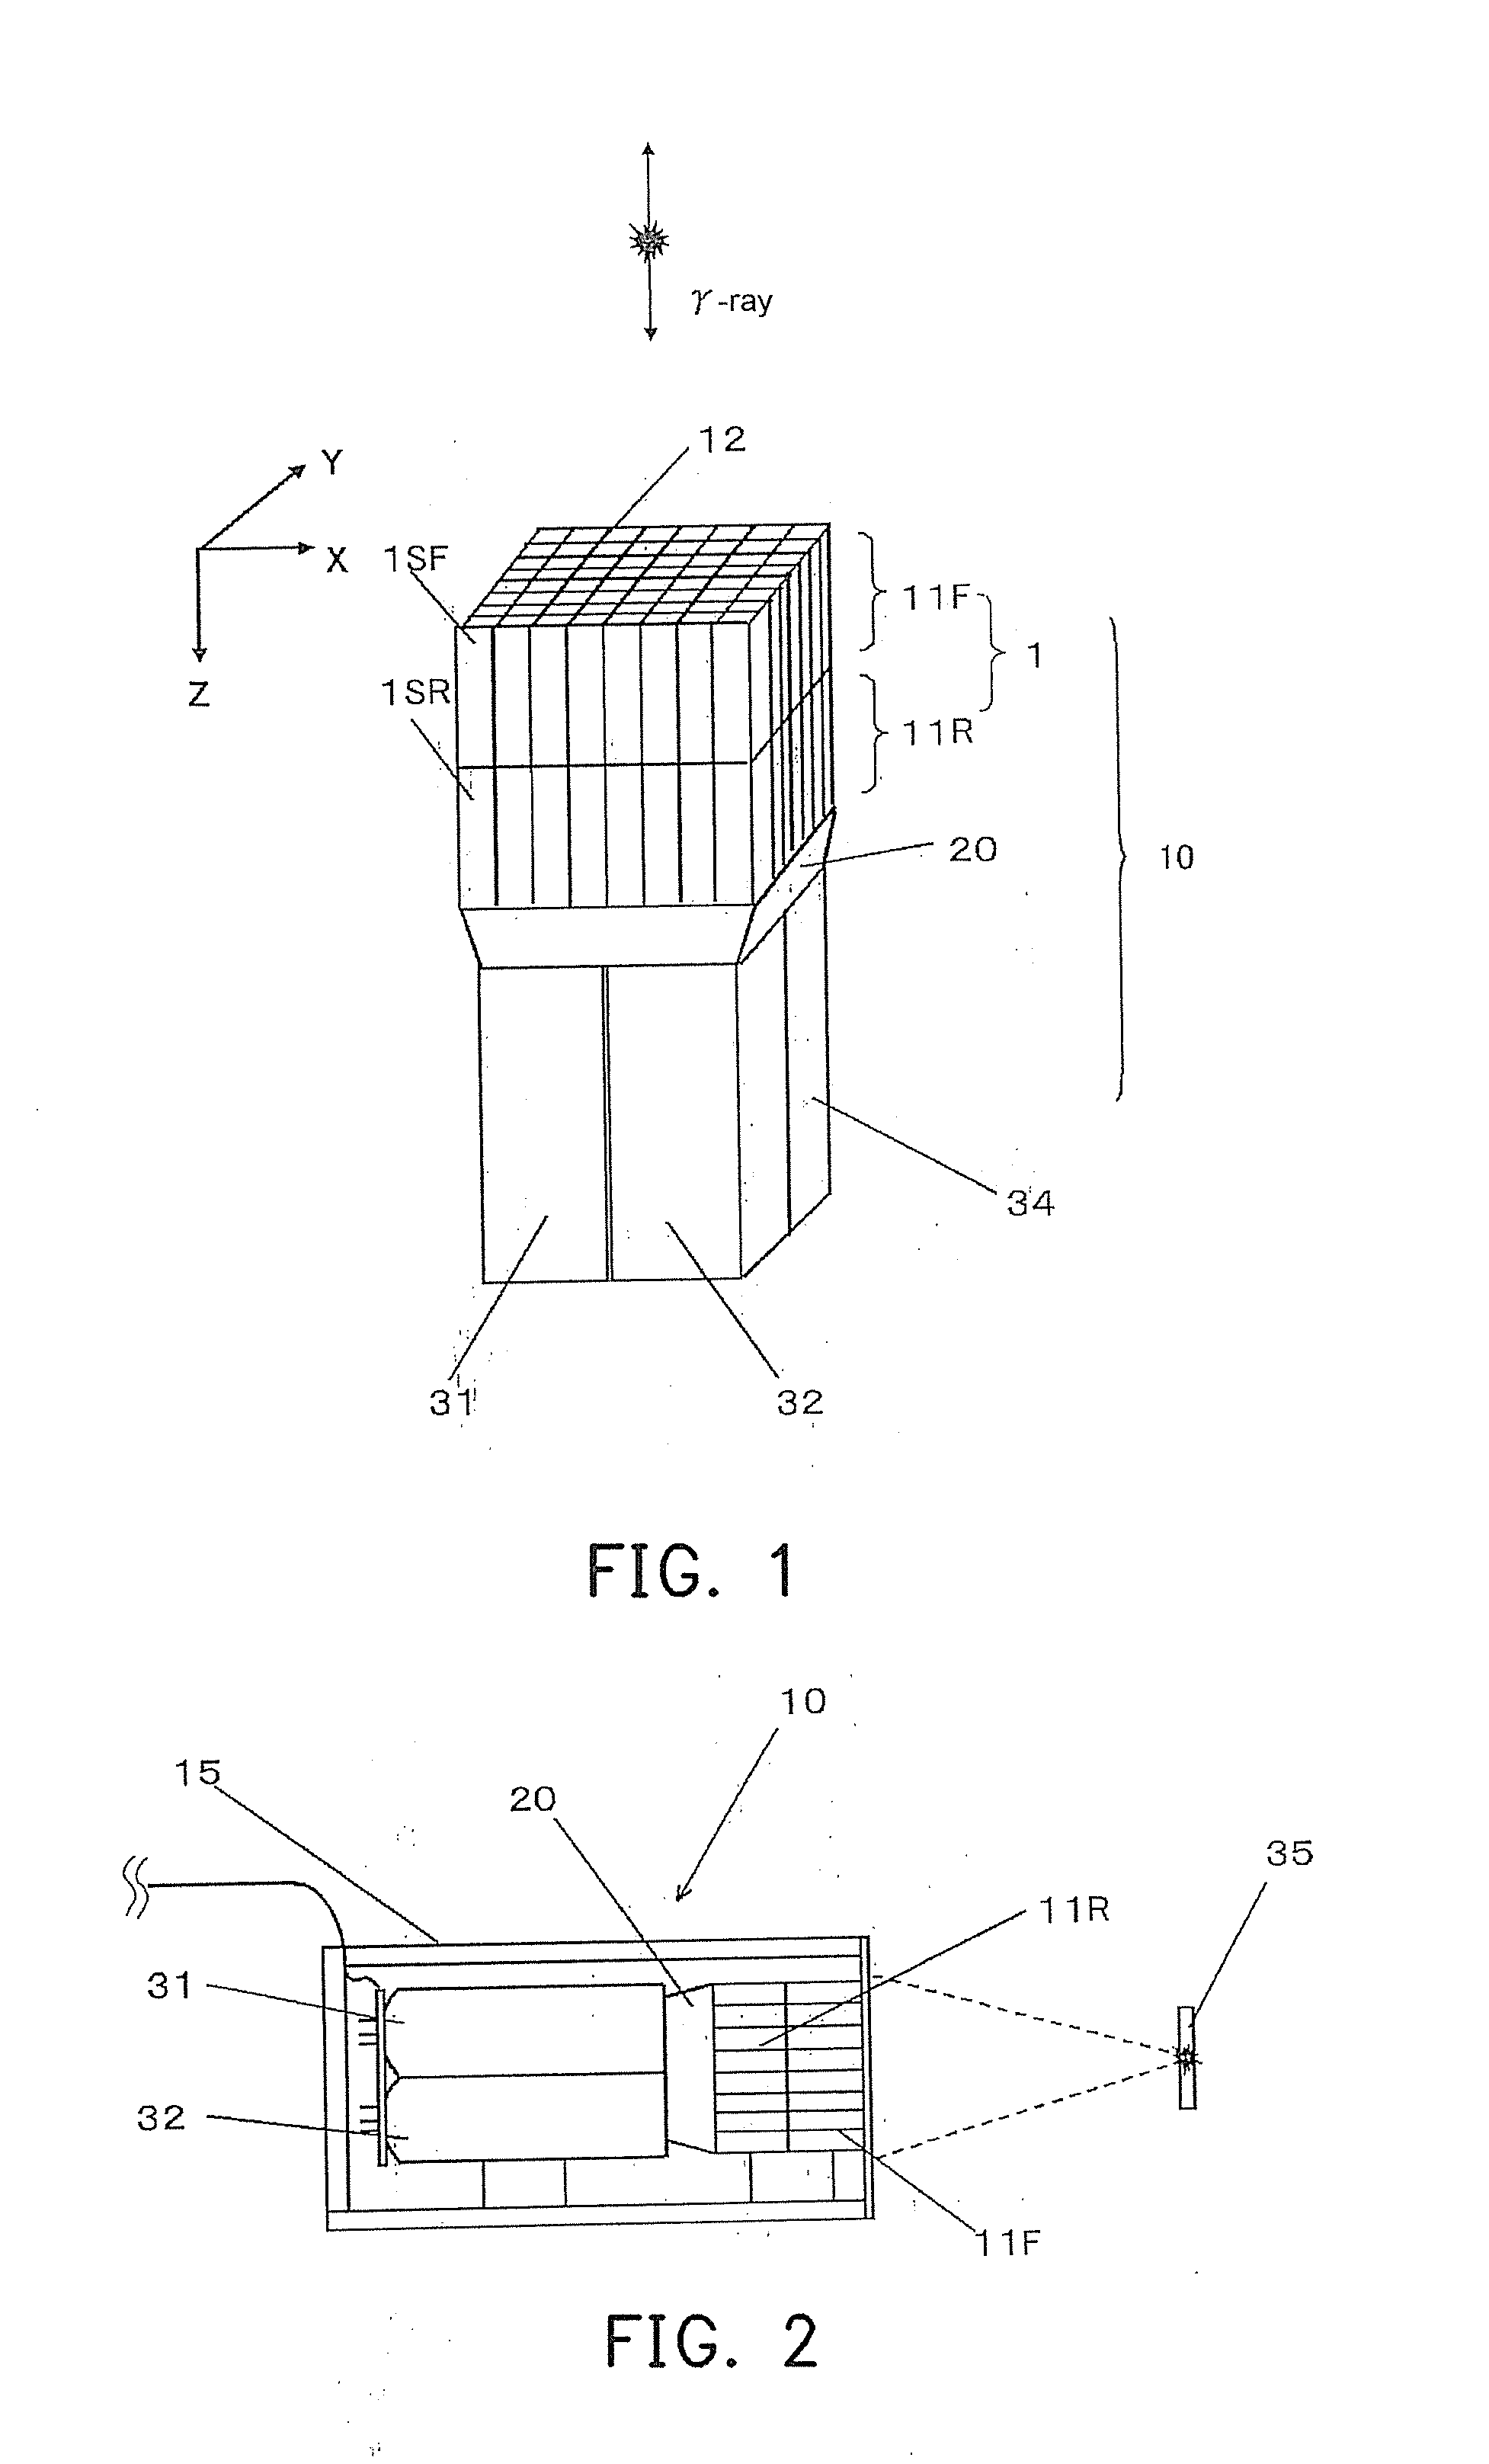 Nuclear medical diagnostic device